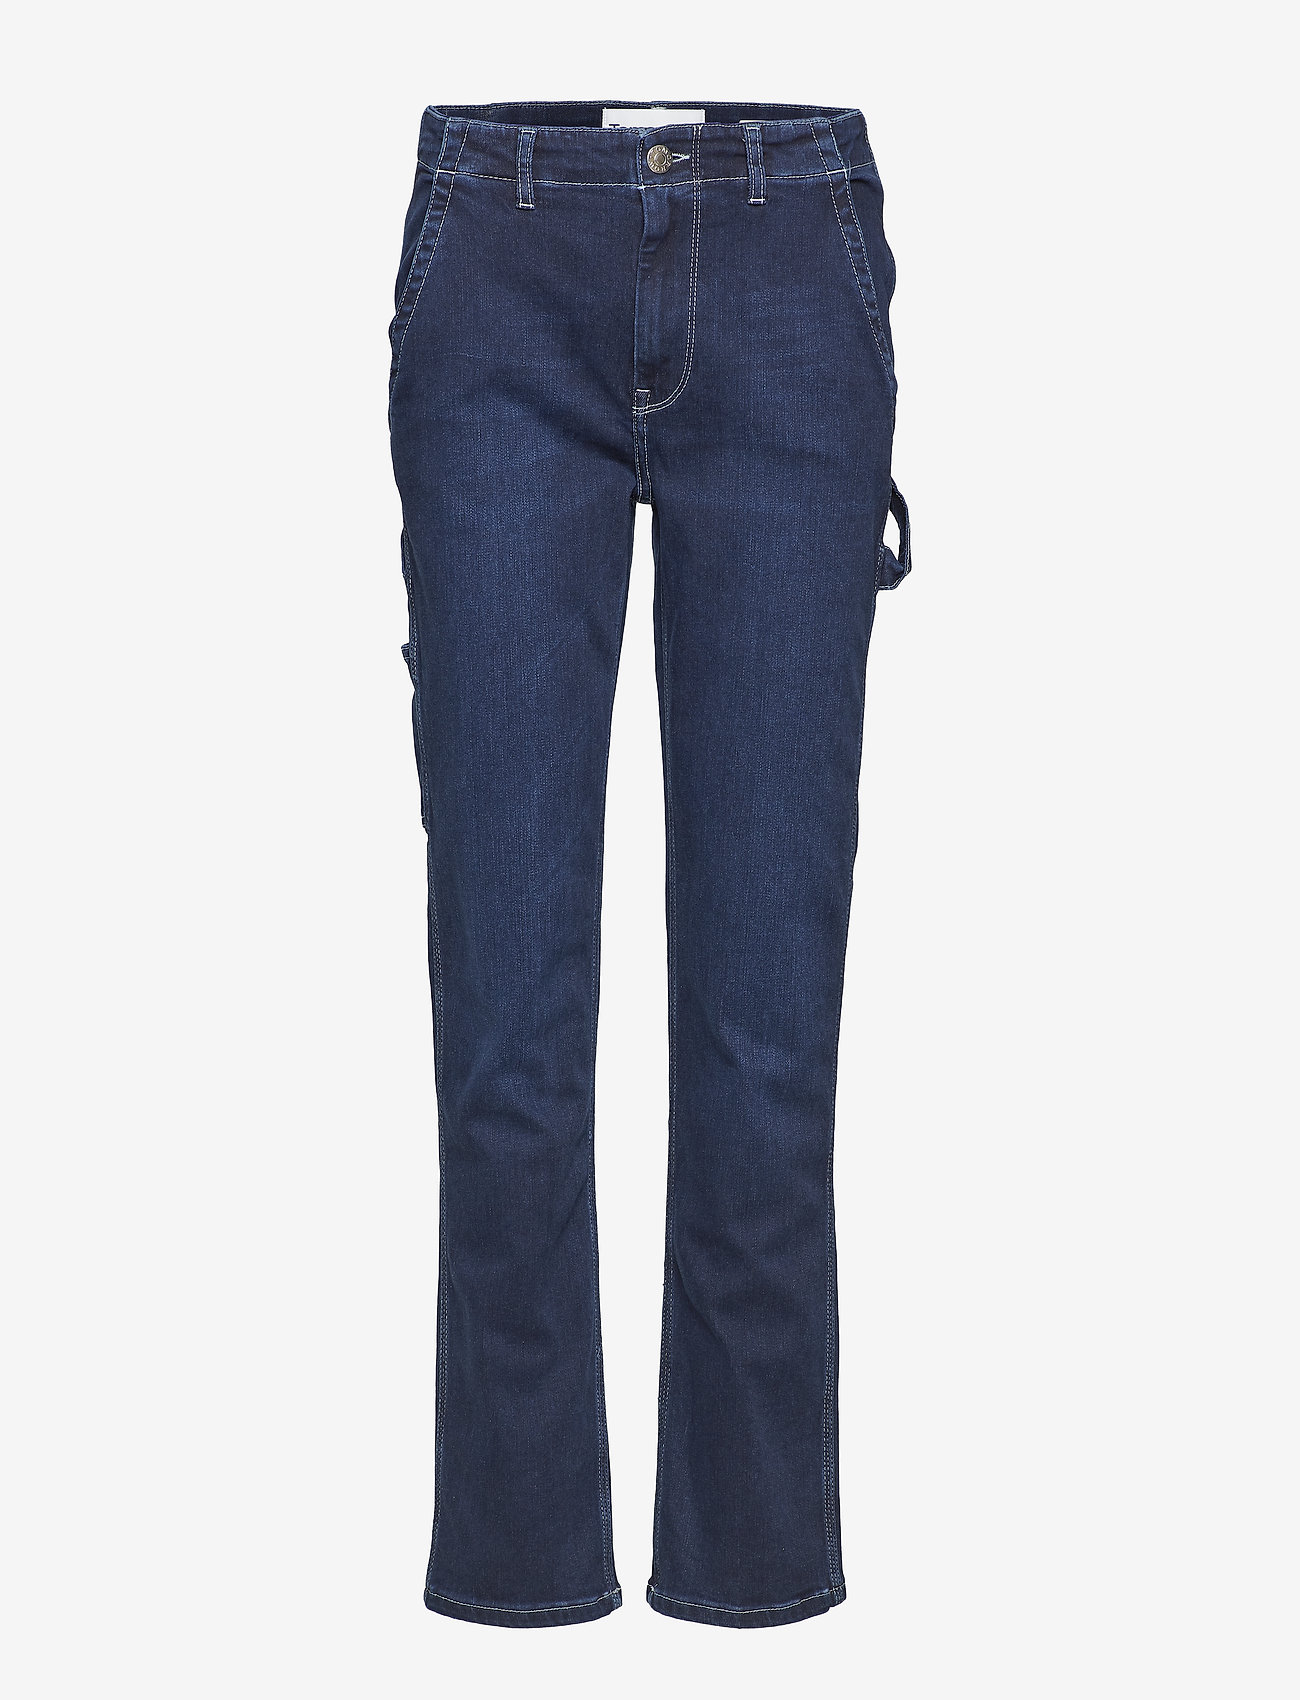 Tomorrow - Lincoln worker pant wash Hounston - straight jeans - 51 denim blue - 0